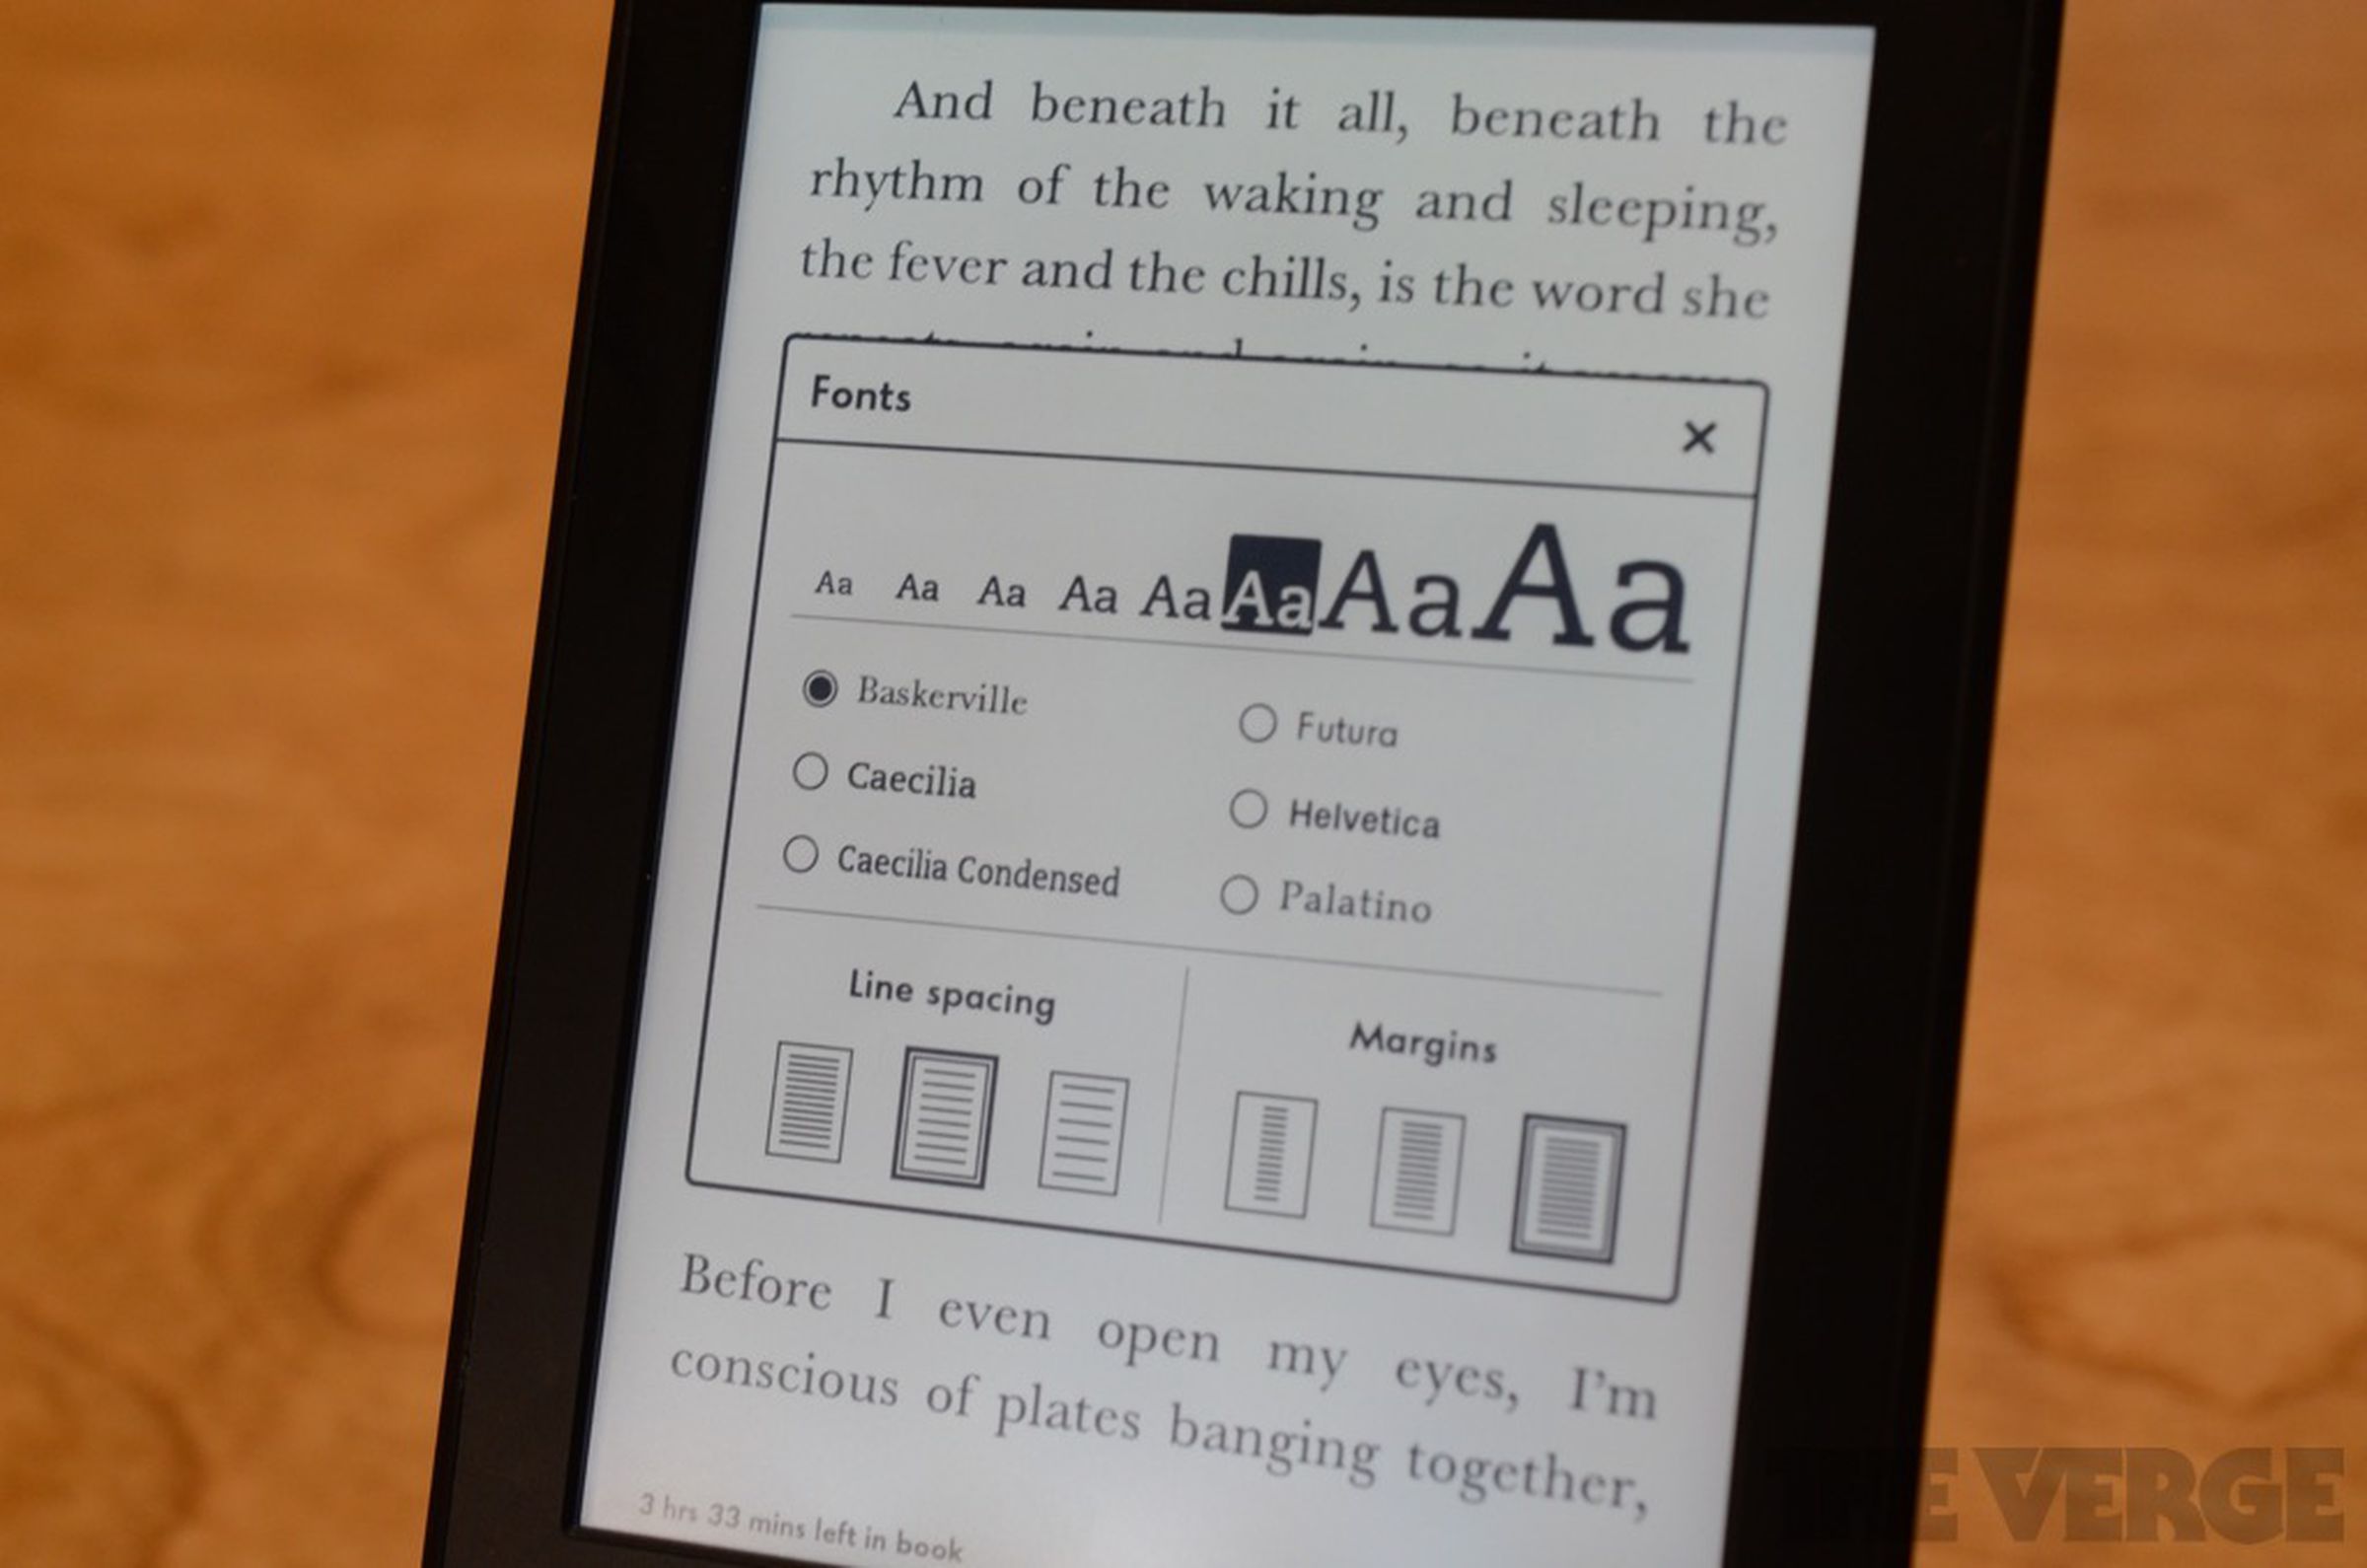 Amazon Kindle paperwhite hands-on pictures